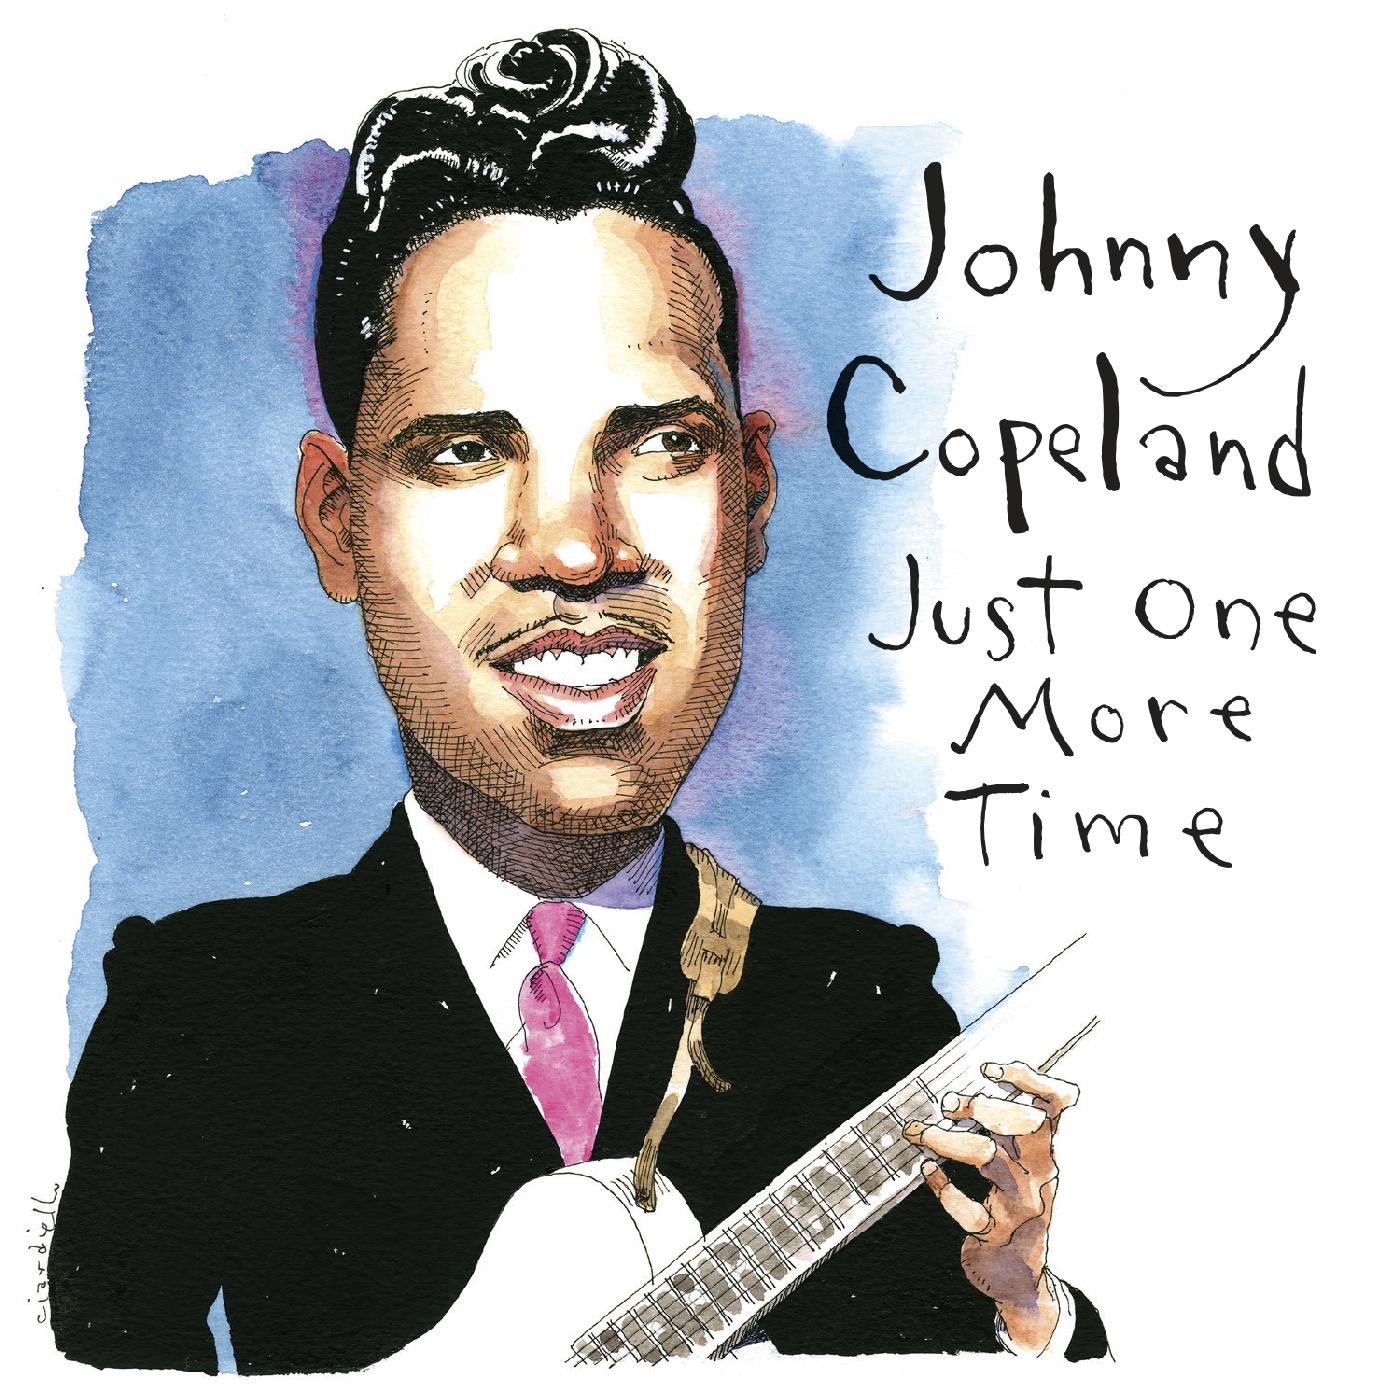 Johnny Copeland - Just One More Time